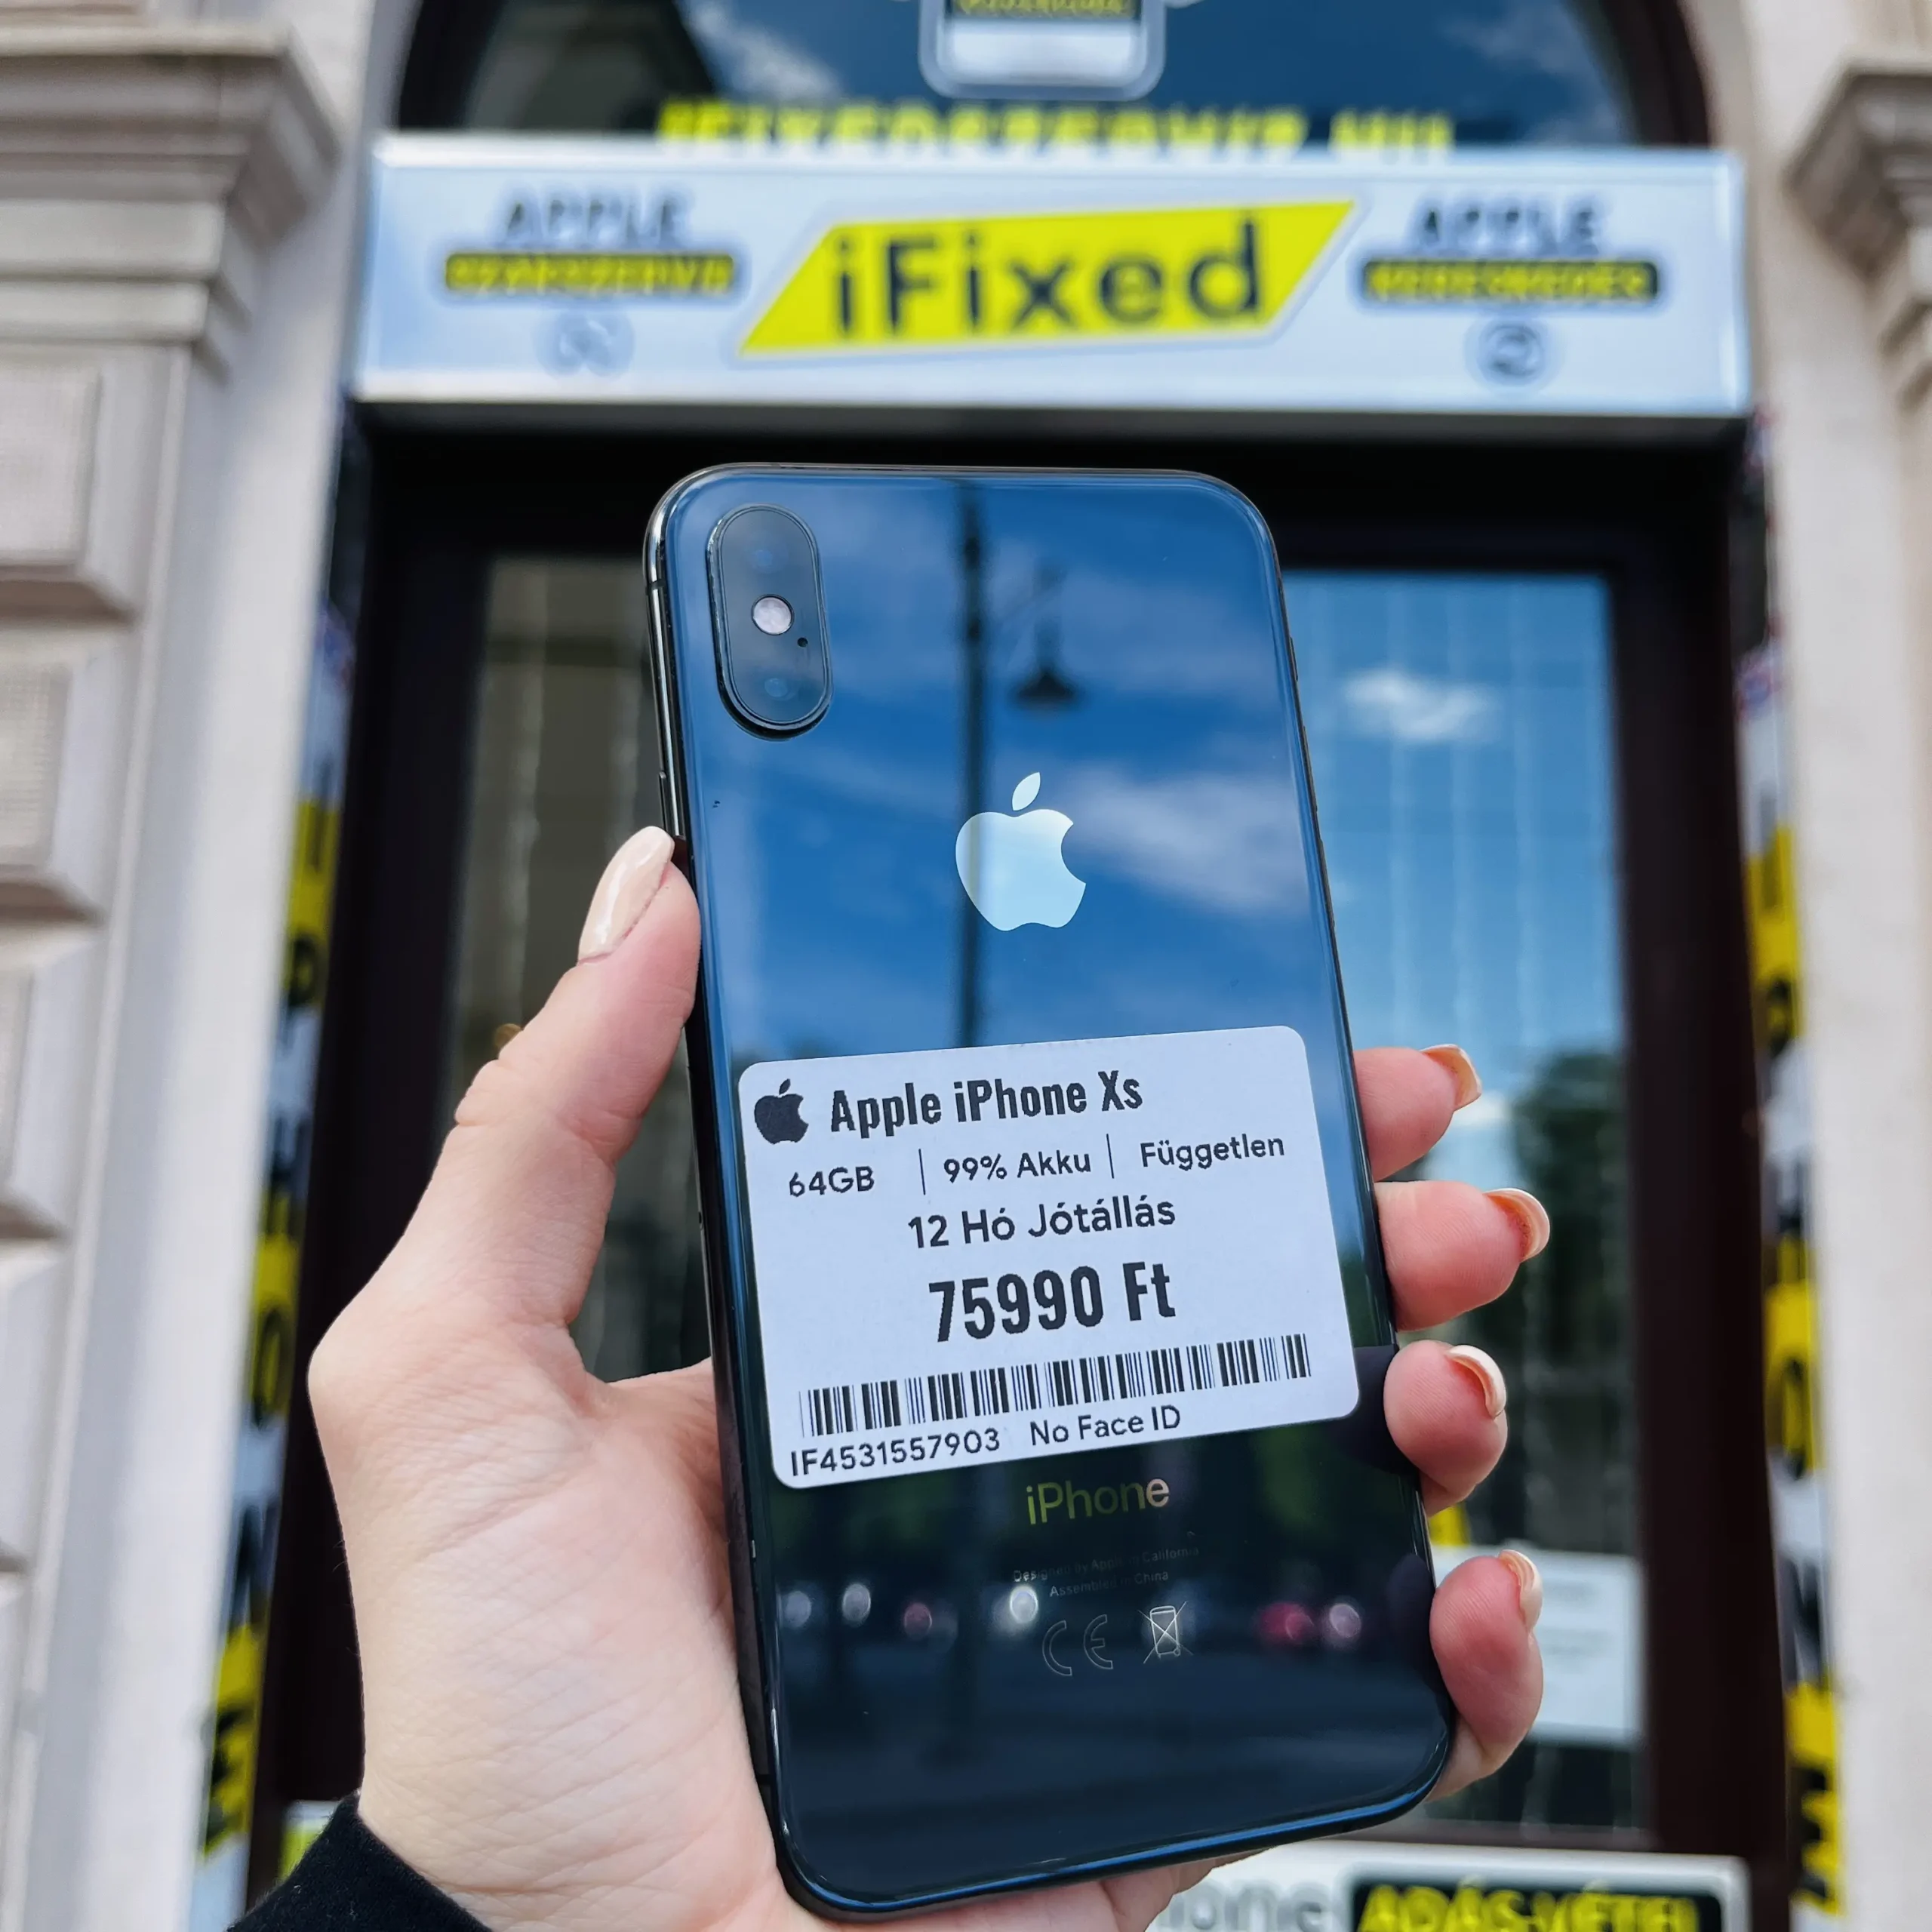 iphone xs (if4531557903)